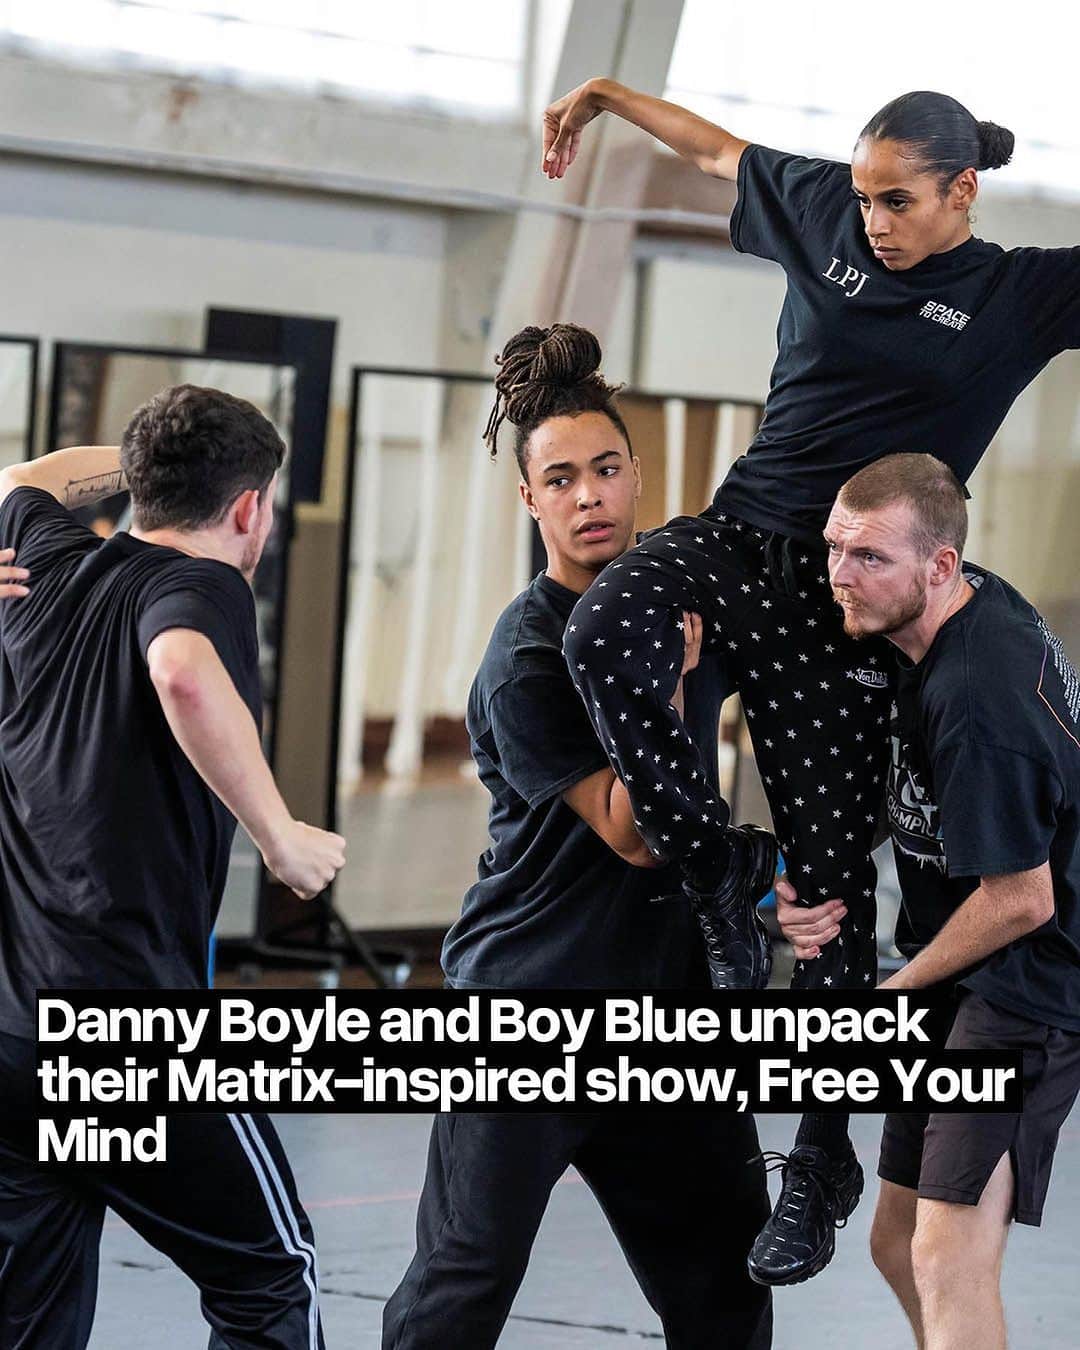 Dazed Magazineのインスタグラム：「Danny Boyle’s hip-hop adaptation of The Matrix, Free Your Mind, is on the horizon so we caught up with the filmmaker and his collaborators @kenrickh20sandy and @mikeyjdotnet to discuss the Manchester-based show hosted by @factory_international🕴️  “Everyone has come with their excellence,” Kenrick tells Dazed, though he adds that the collaboration began with a sense of kinship, with emphasis placed on putting egos aside and listening to each other’s perspectives.   “As much as this is a professional job,” he explains, “we’re growing friendships in this space, which makes it even more powerful.”  First released in 1999, The Matrix made a number of prophecies about humanity’s techno-dystopian future, from mind uploading, to the ubiquity of artificial intelligence, to the blurry lines between real life and a simulated “reality”.   Through the link in our bio, Danny Boyle, Kenrick Sandy, and Mikey Asante dive deeper into their unconventional take on The Matrix, and answer the all-important question: if we are living in a simulation, would they choose to wake up or keep dreaming? 🤔  📷 Tristram Kenton  ✍️ @t.s.waite」